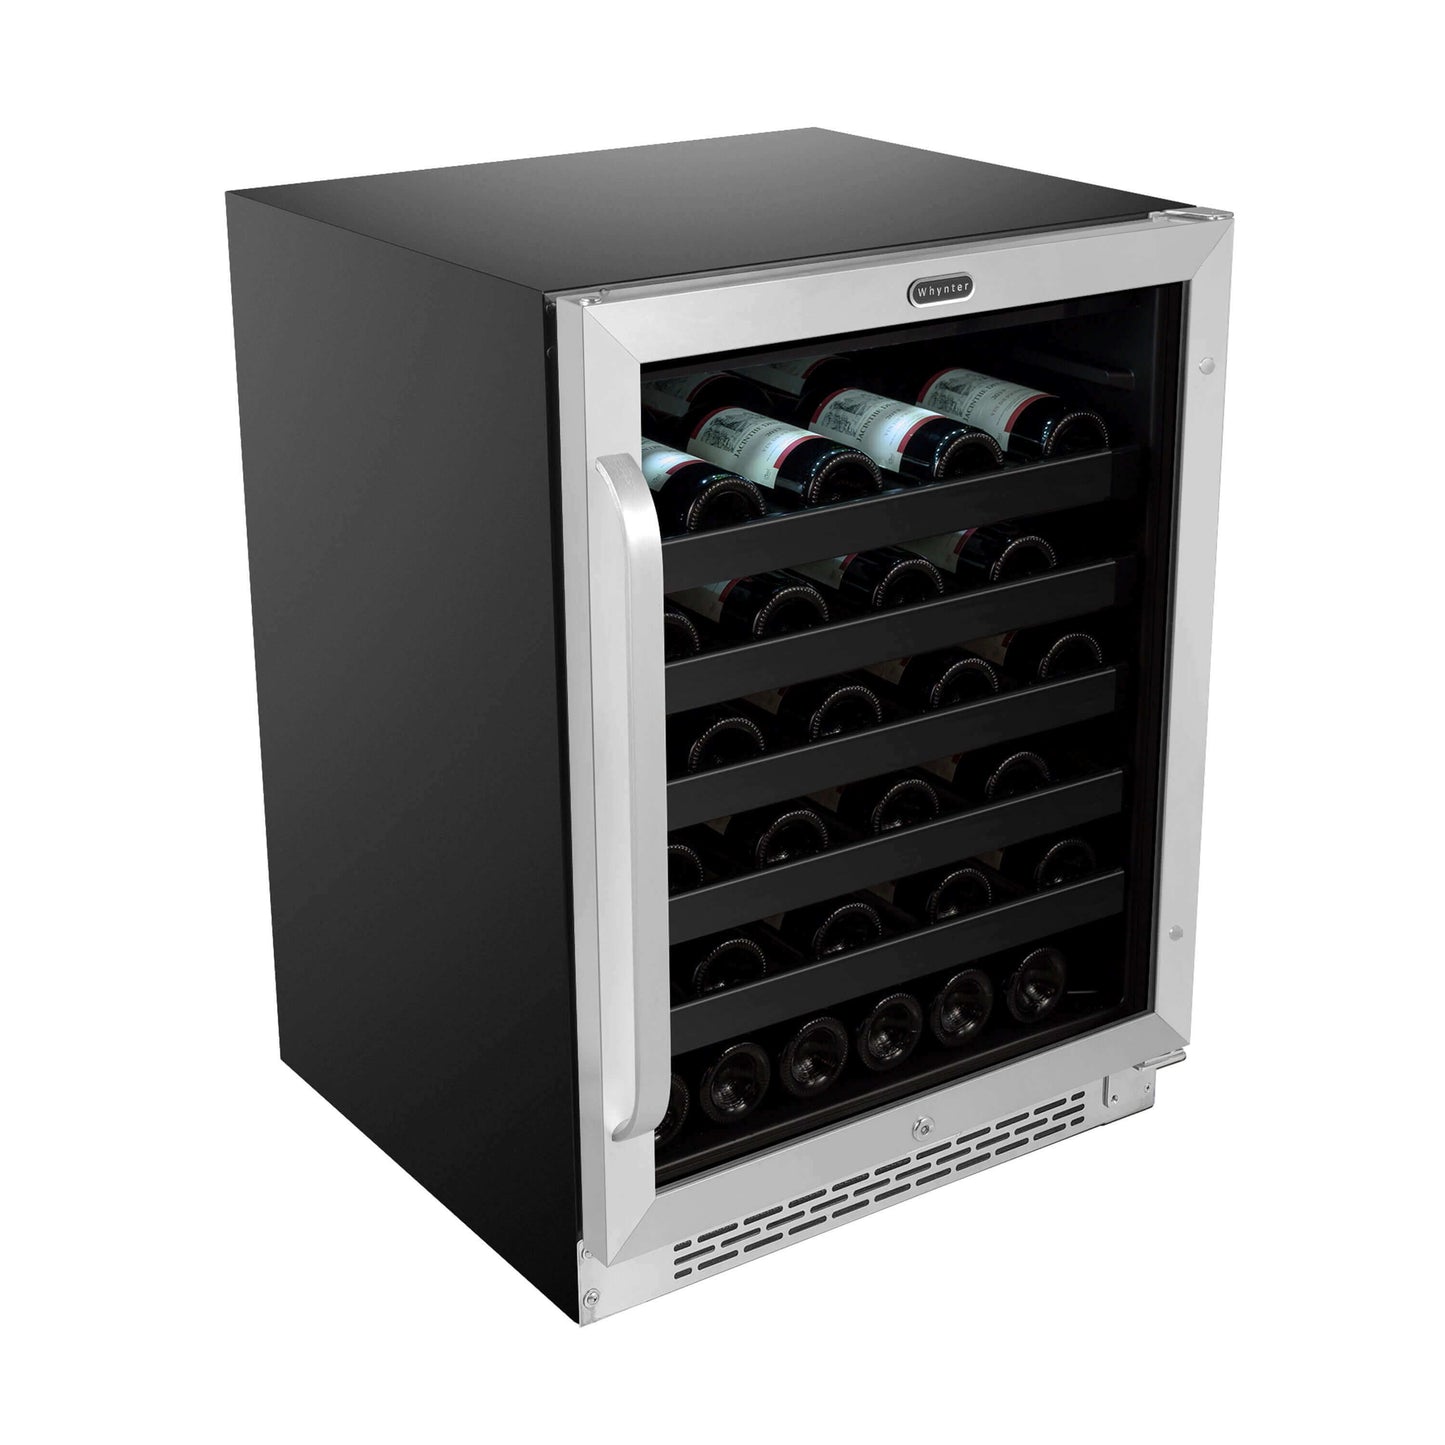 Whynter BWR-408SB 24 inch Built-In 46 Bottle Undercounter Stainless Steel Wine Refrigerator with Reversible Door, Digital Control, Lock, and Carbon Filter